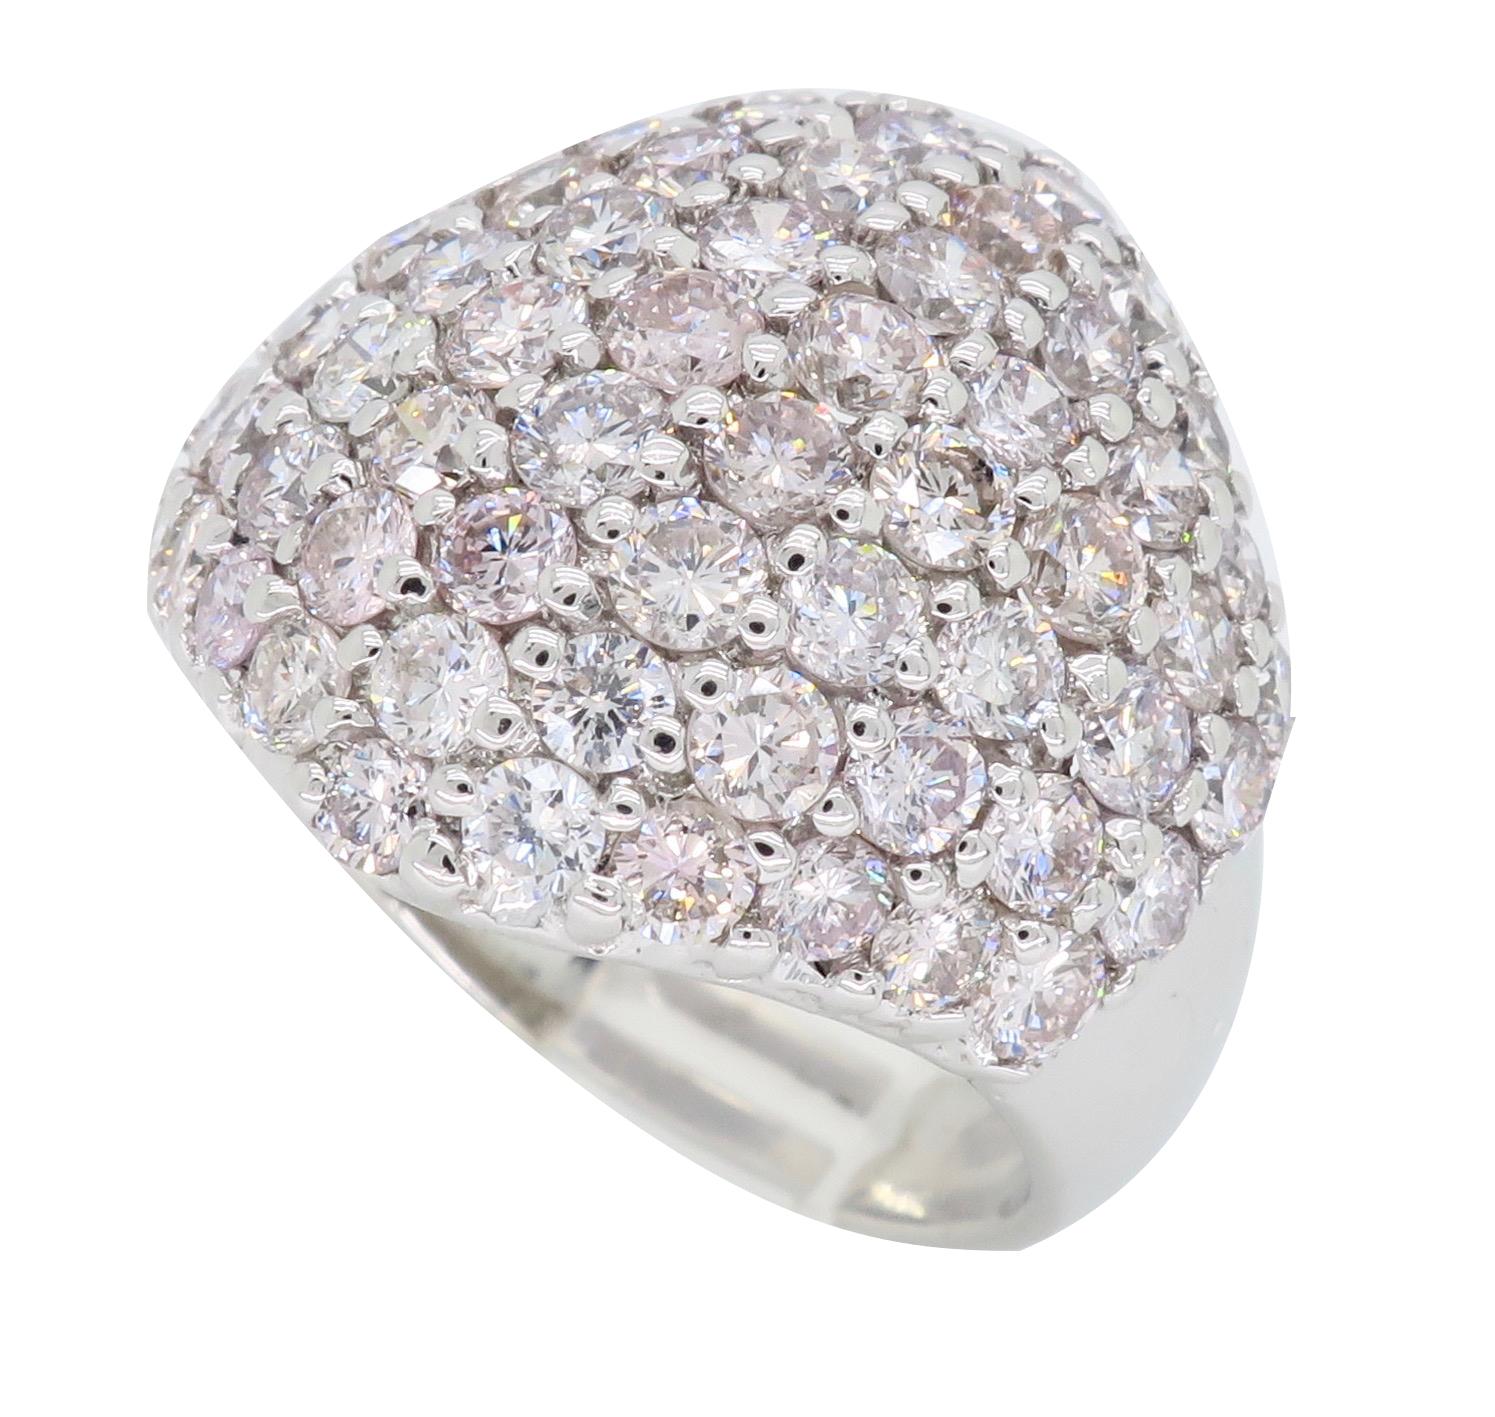 Glamorous light pink diamond cocktail ring set in 14k white gold.

Diamond Cut: Round Brilliant Cut 
Average Diamond Color: Light Pink
Average Diamond Clarity: VS-SI
Diamond Carat Weight:  Approximately 3.48CTW 
Metal: 14K White Gold
Ring Size: